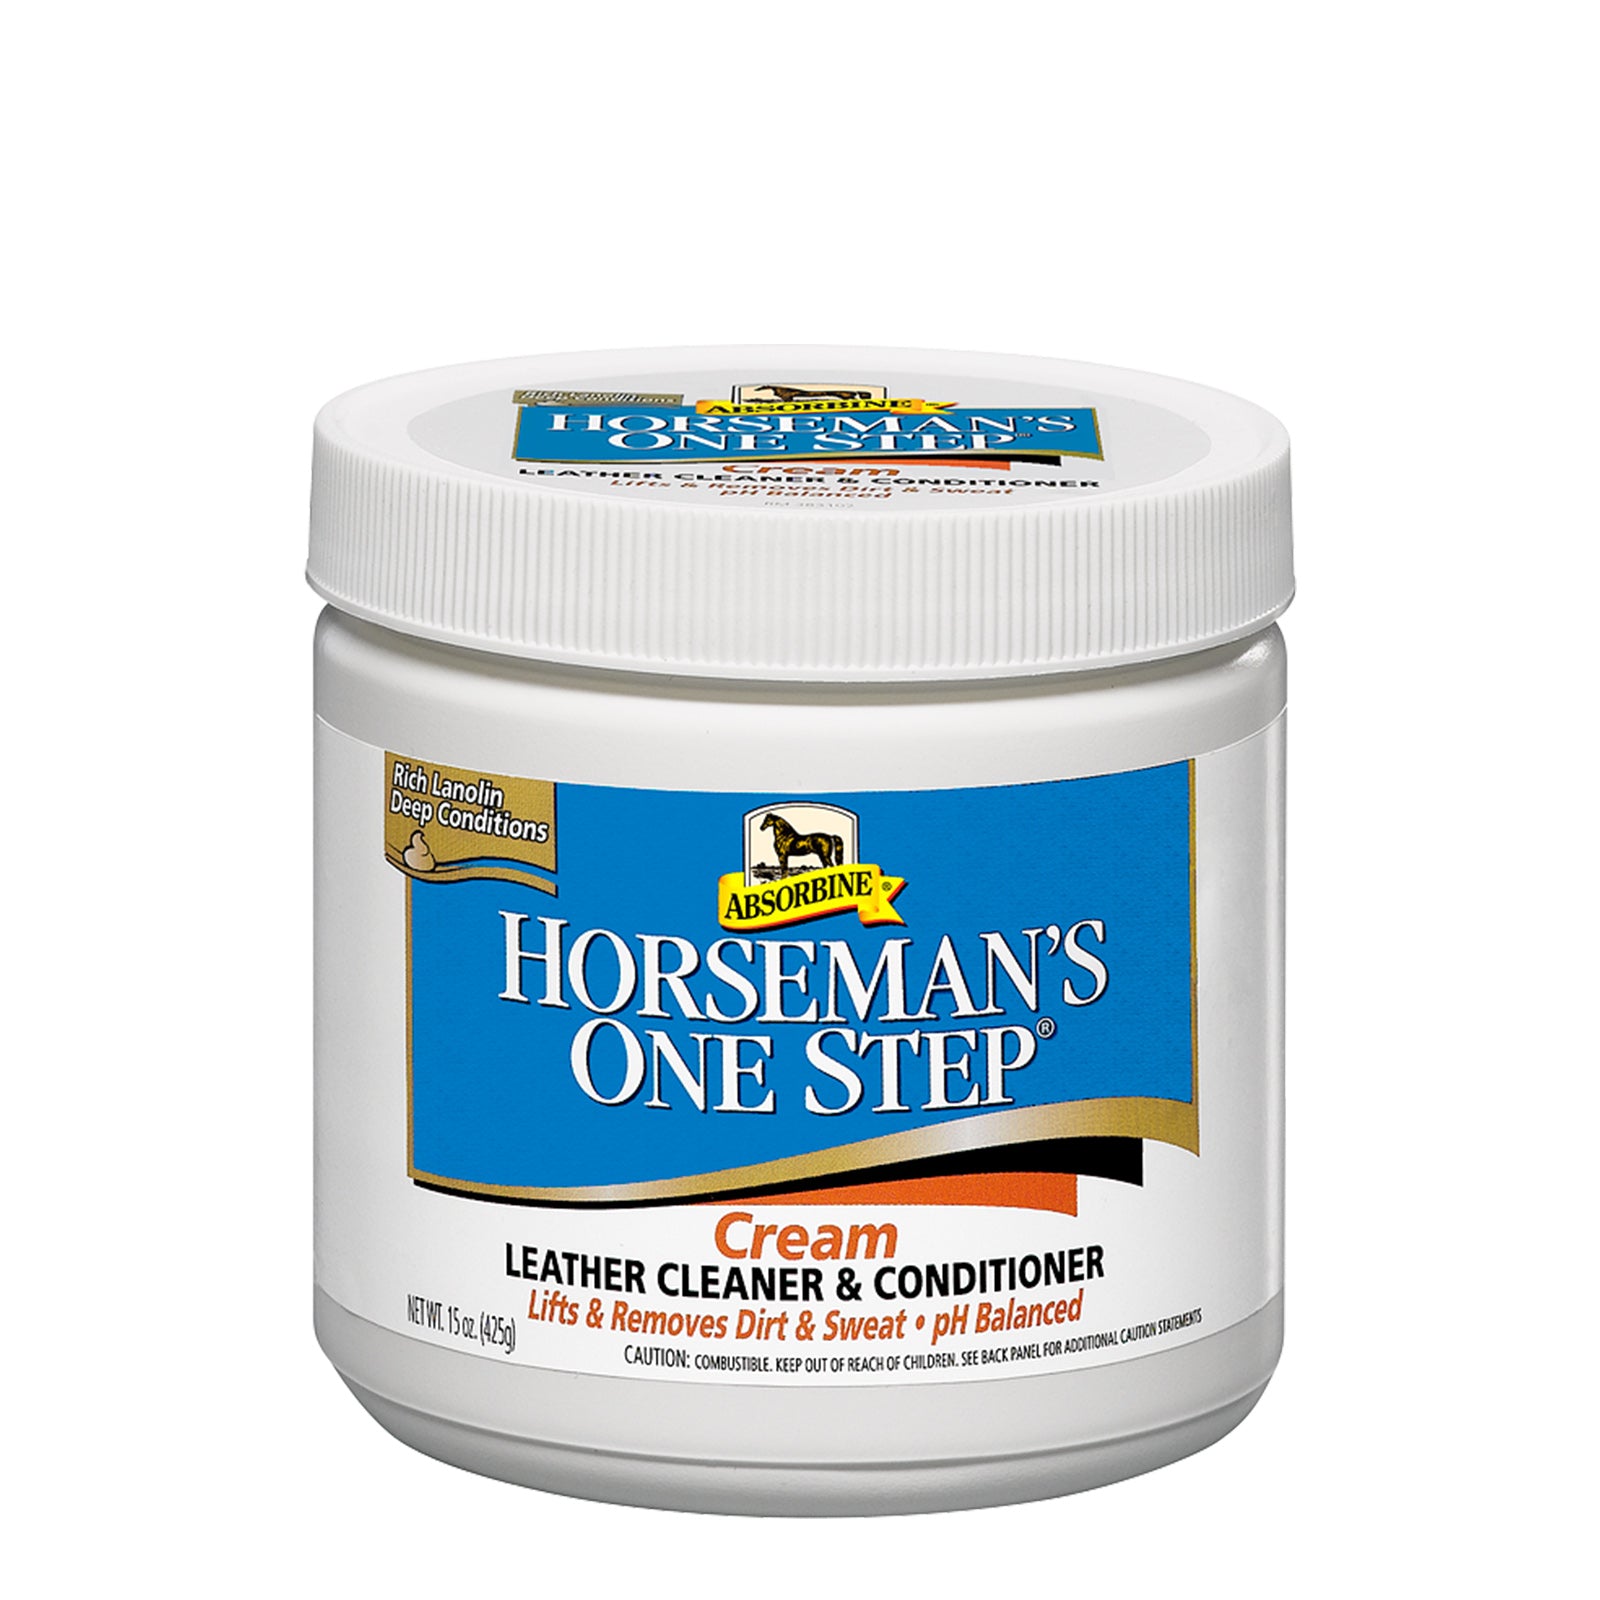 Organic Leather Conditioner – The Herbal Horse